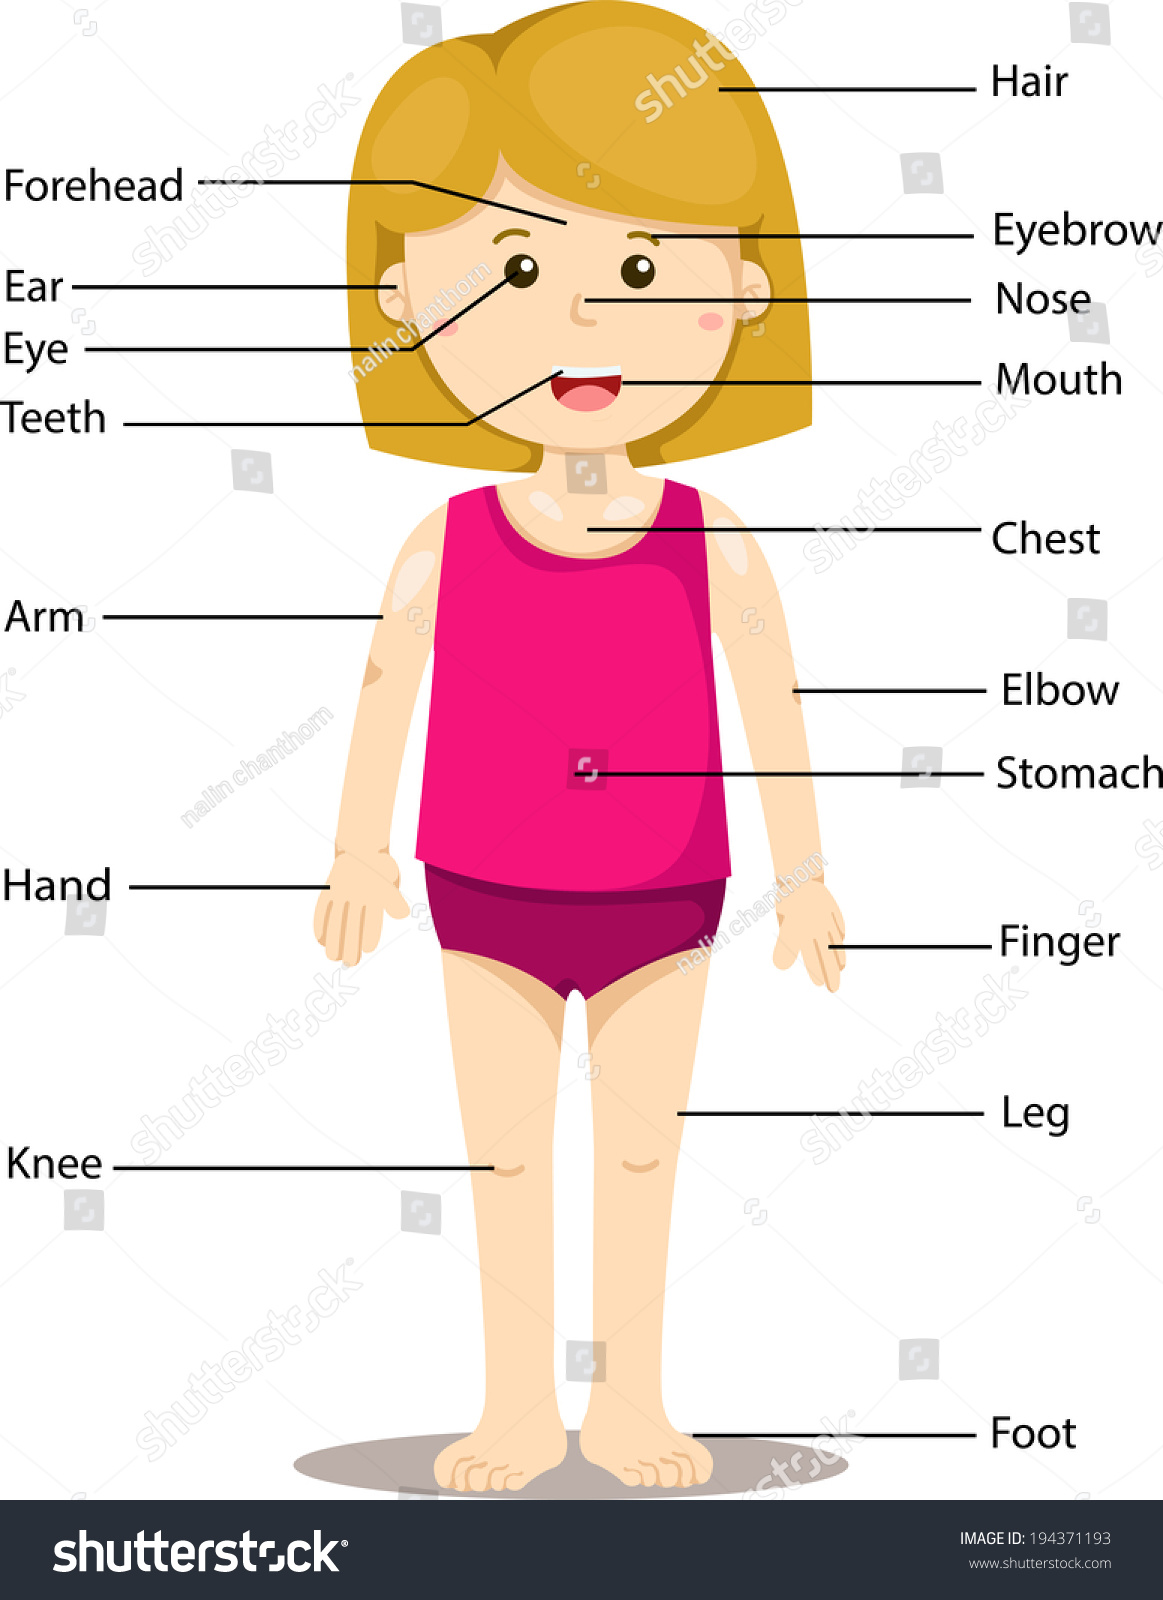 Body Parts Of Woman Name With Picture / My Body Parts Names in English